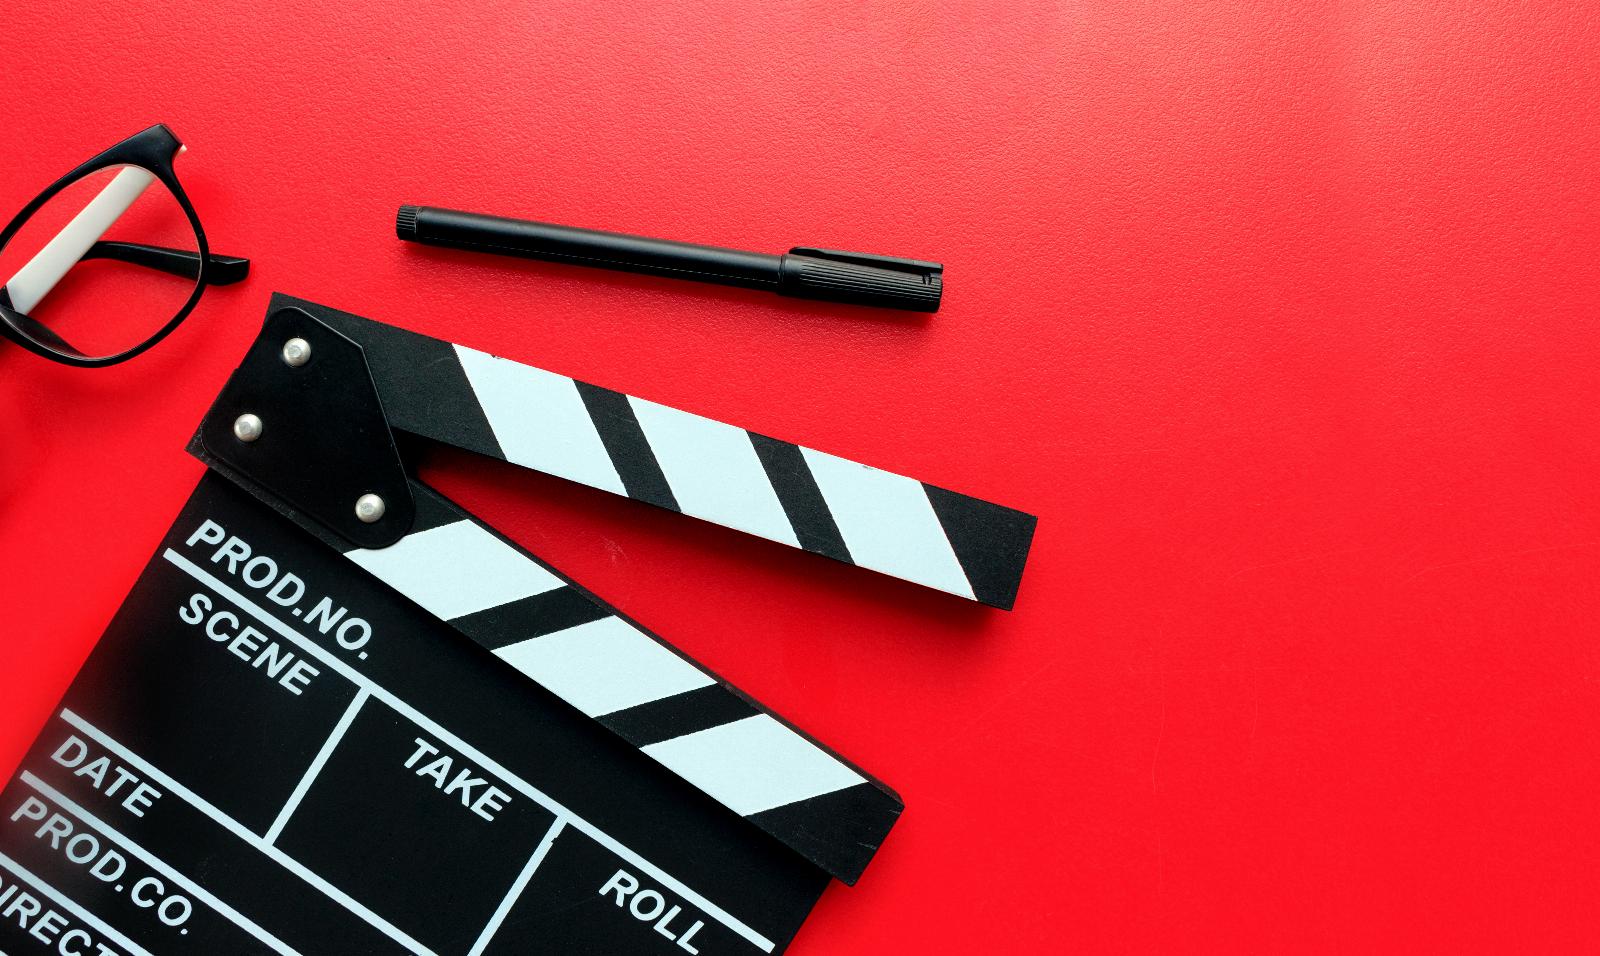 Avail rolls out its AI summarization tool to help Hollywood execs keep up with script coverage